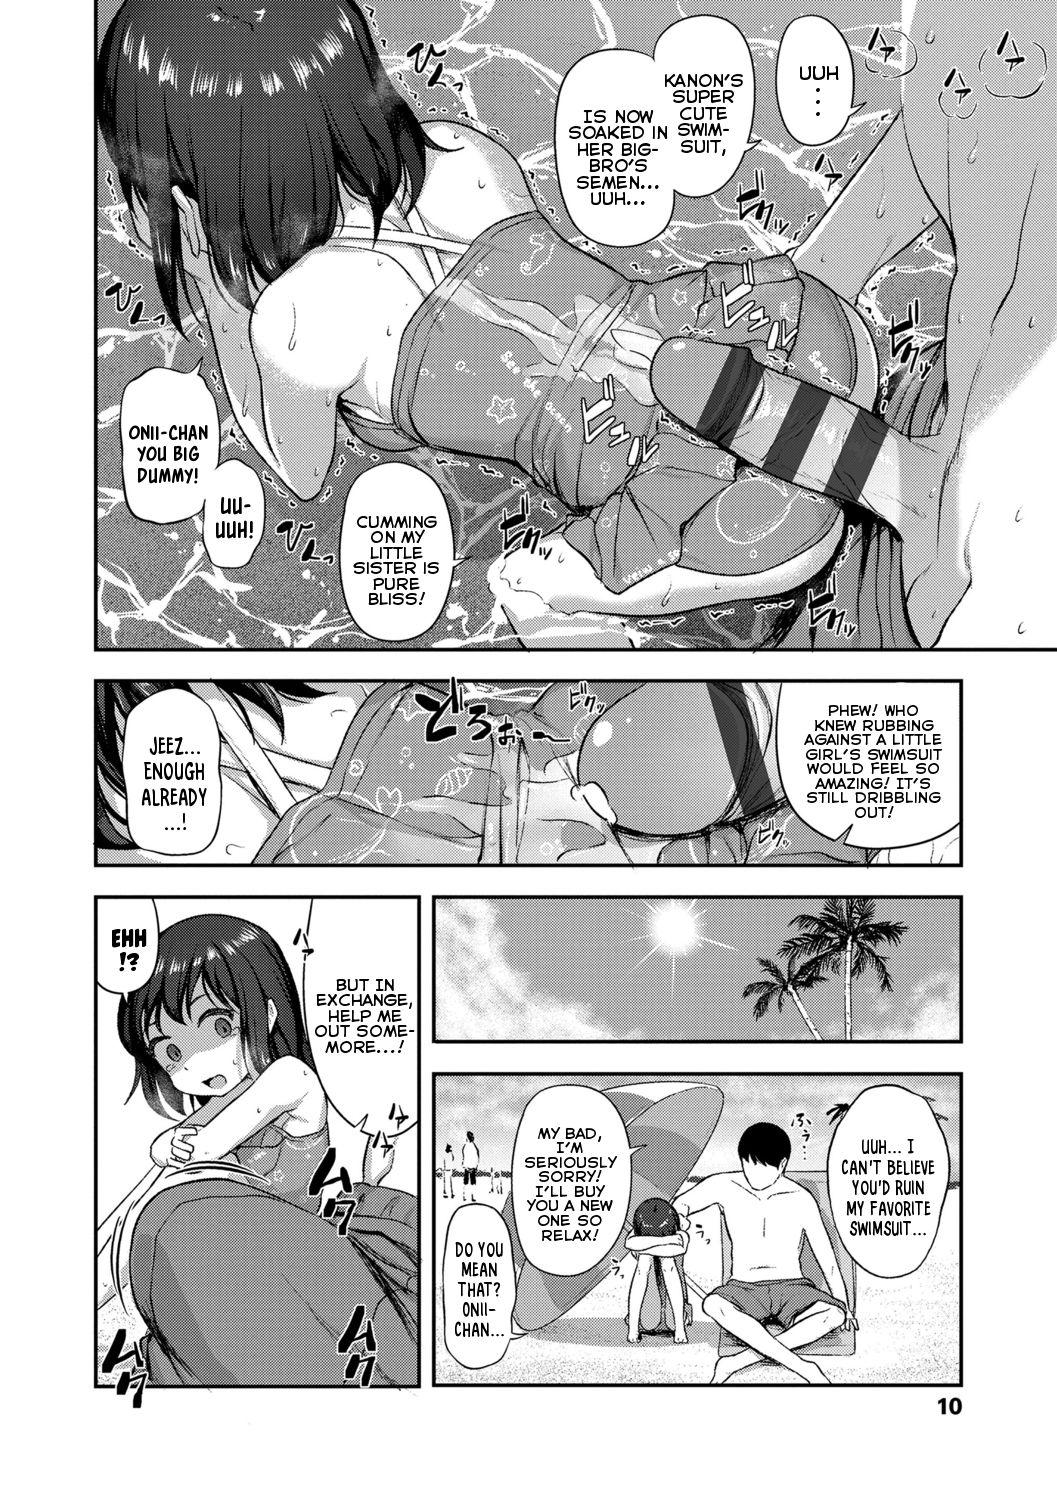 Sweet [Hayake] Imouto no Hadaka o Mite Koufun Suru nante Hen na Onii-chan | What Kind of Weirdo Onii-chan Gets Excited From Seeing His Little Sister Naked? [English] [Mistvern + Shippoyasha] [Digital] Sixtynine - Page 12